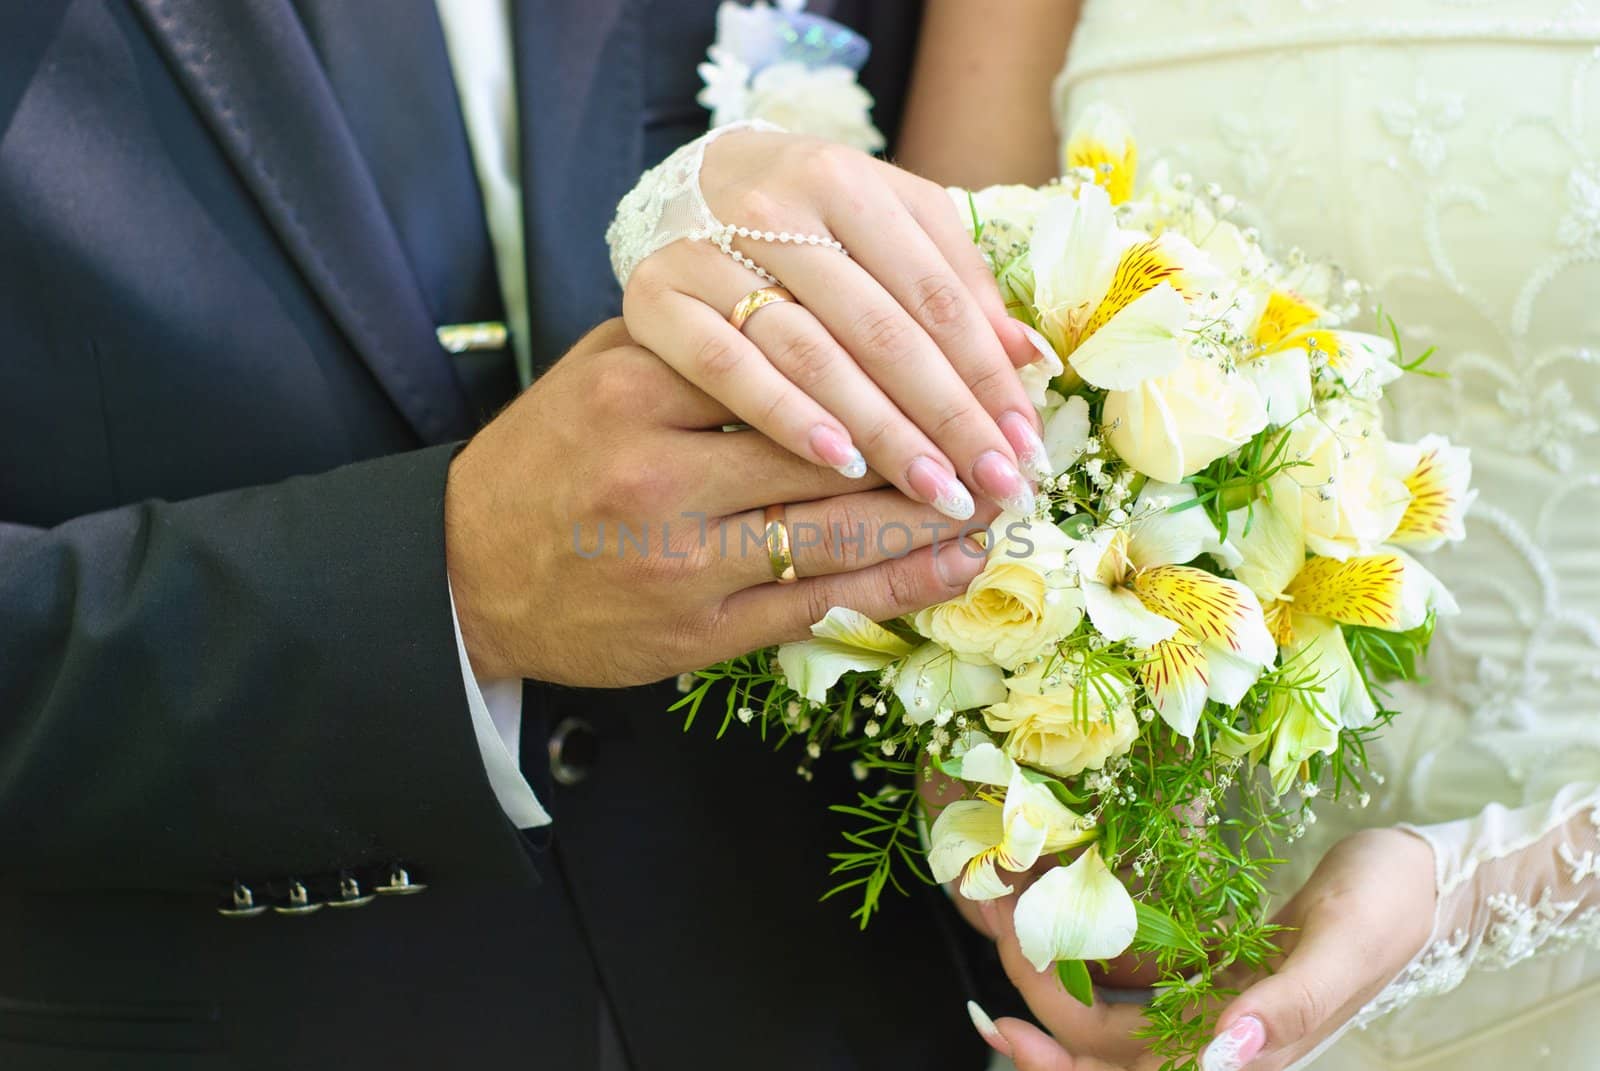 Hands of bride and groom with wedding rings over the bridal bouquet